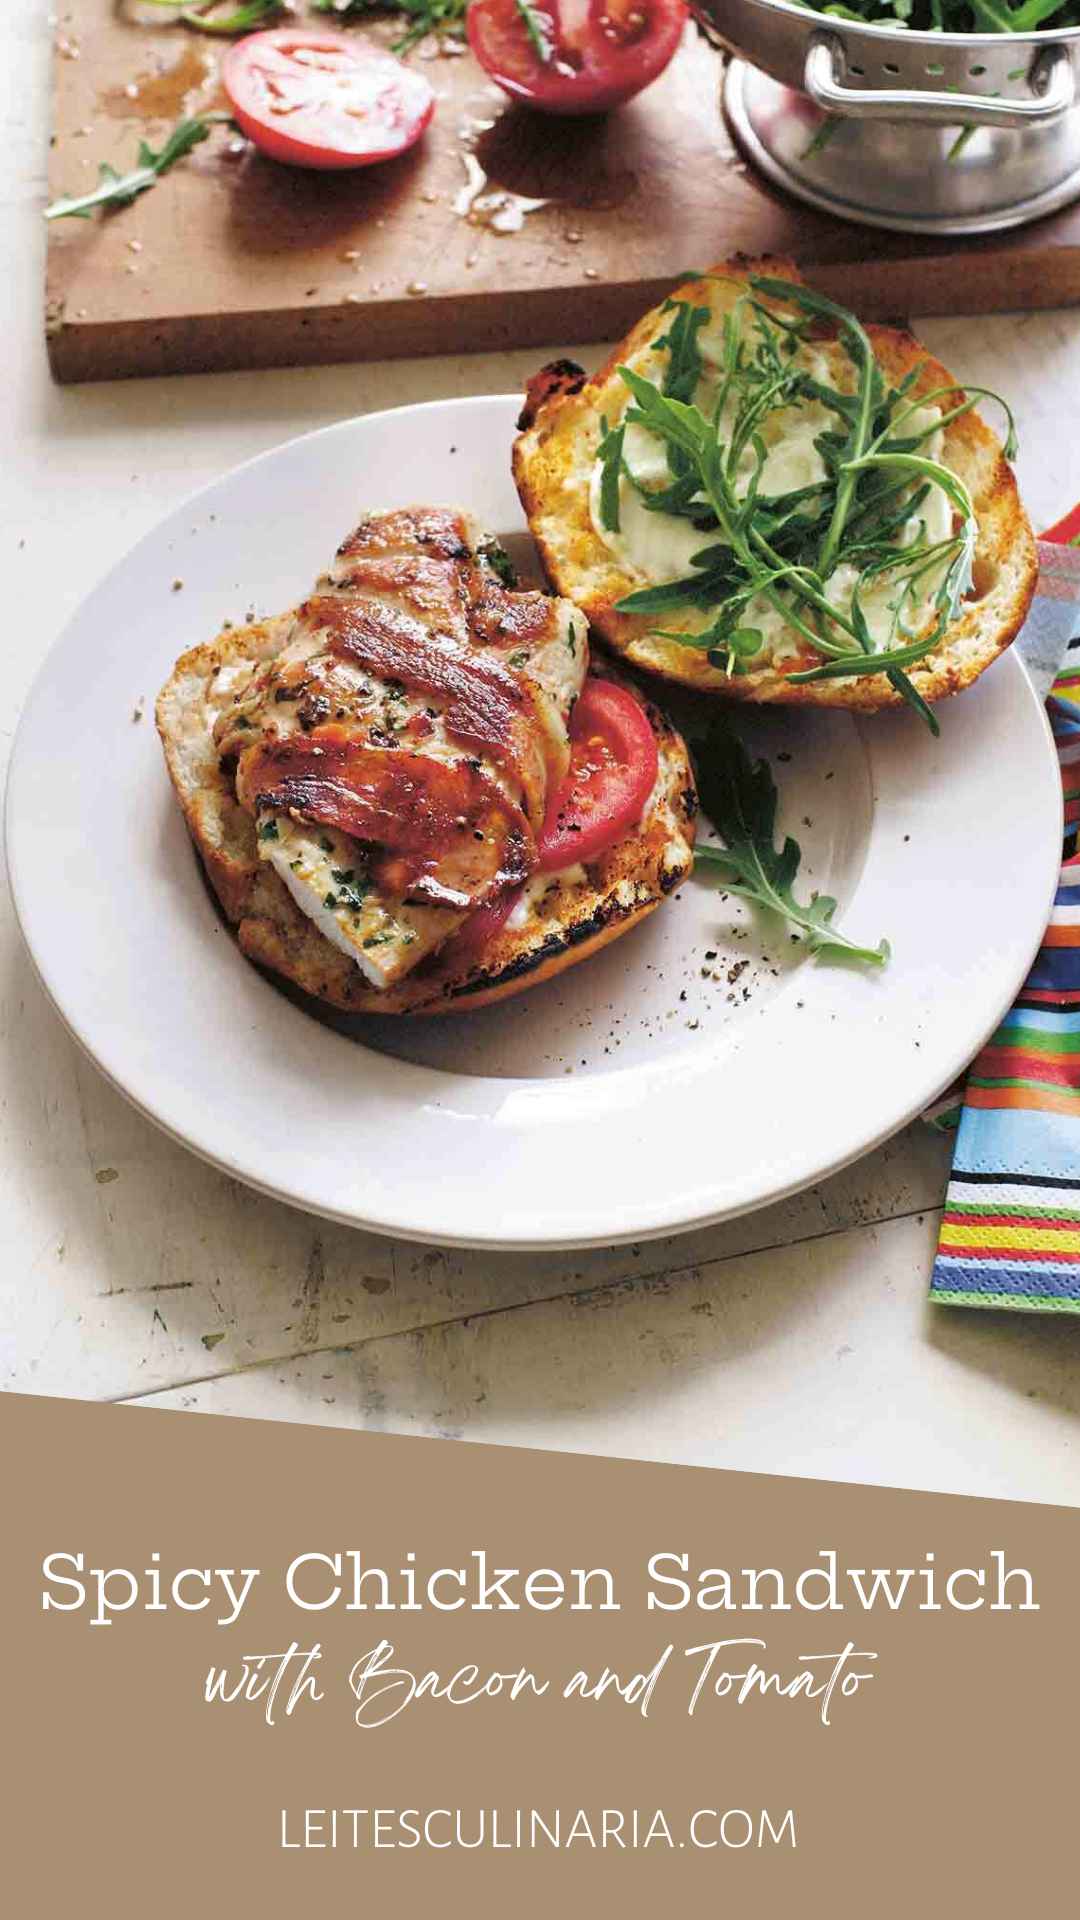 A spicy grilled chicken sandwich with bacon, tomato, and arugula on a white plate.